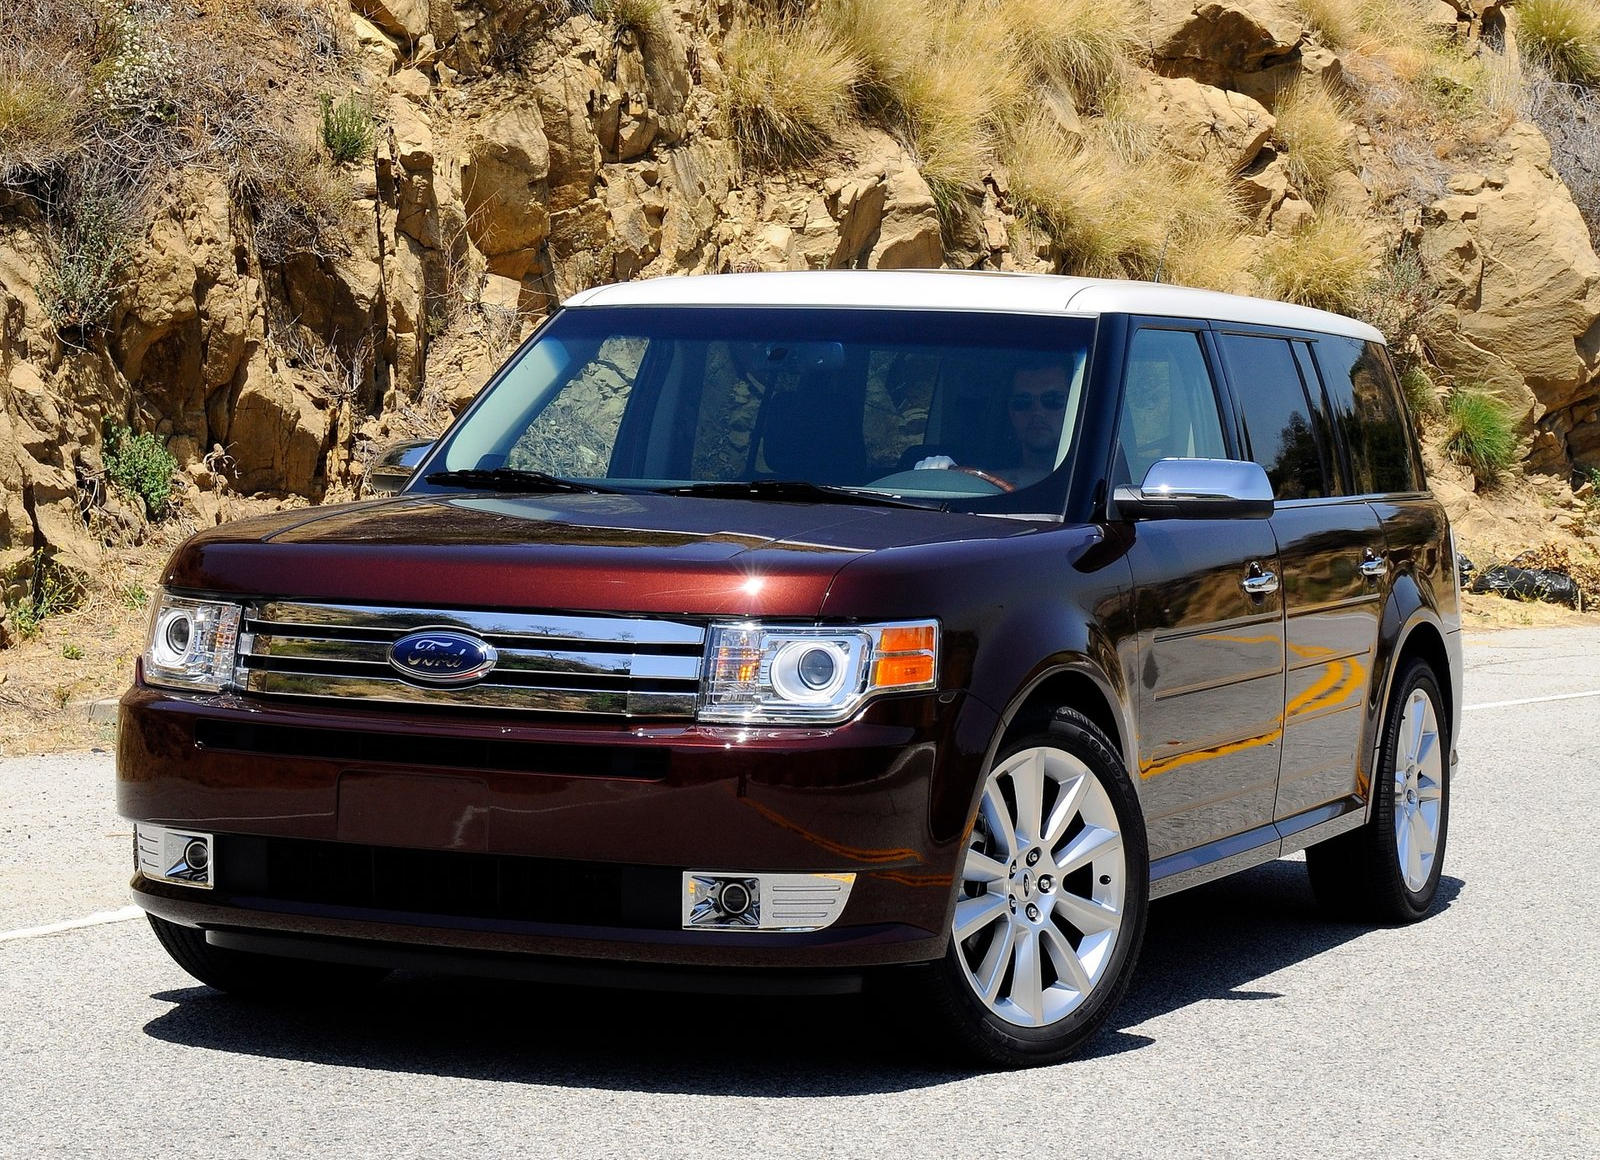 2011 Ford Flex: Review, Trims, Specs, Price, New Interior Features